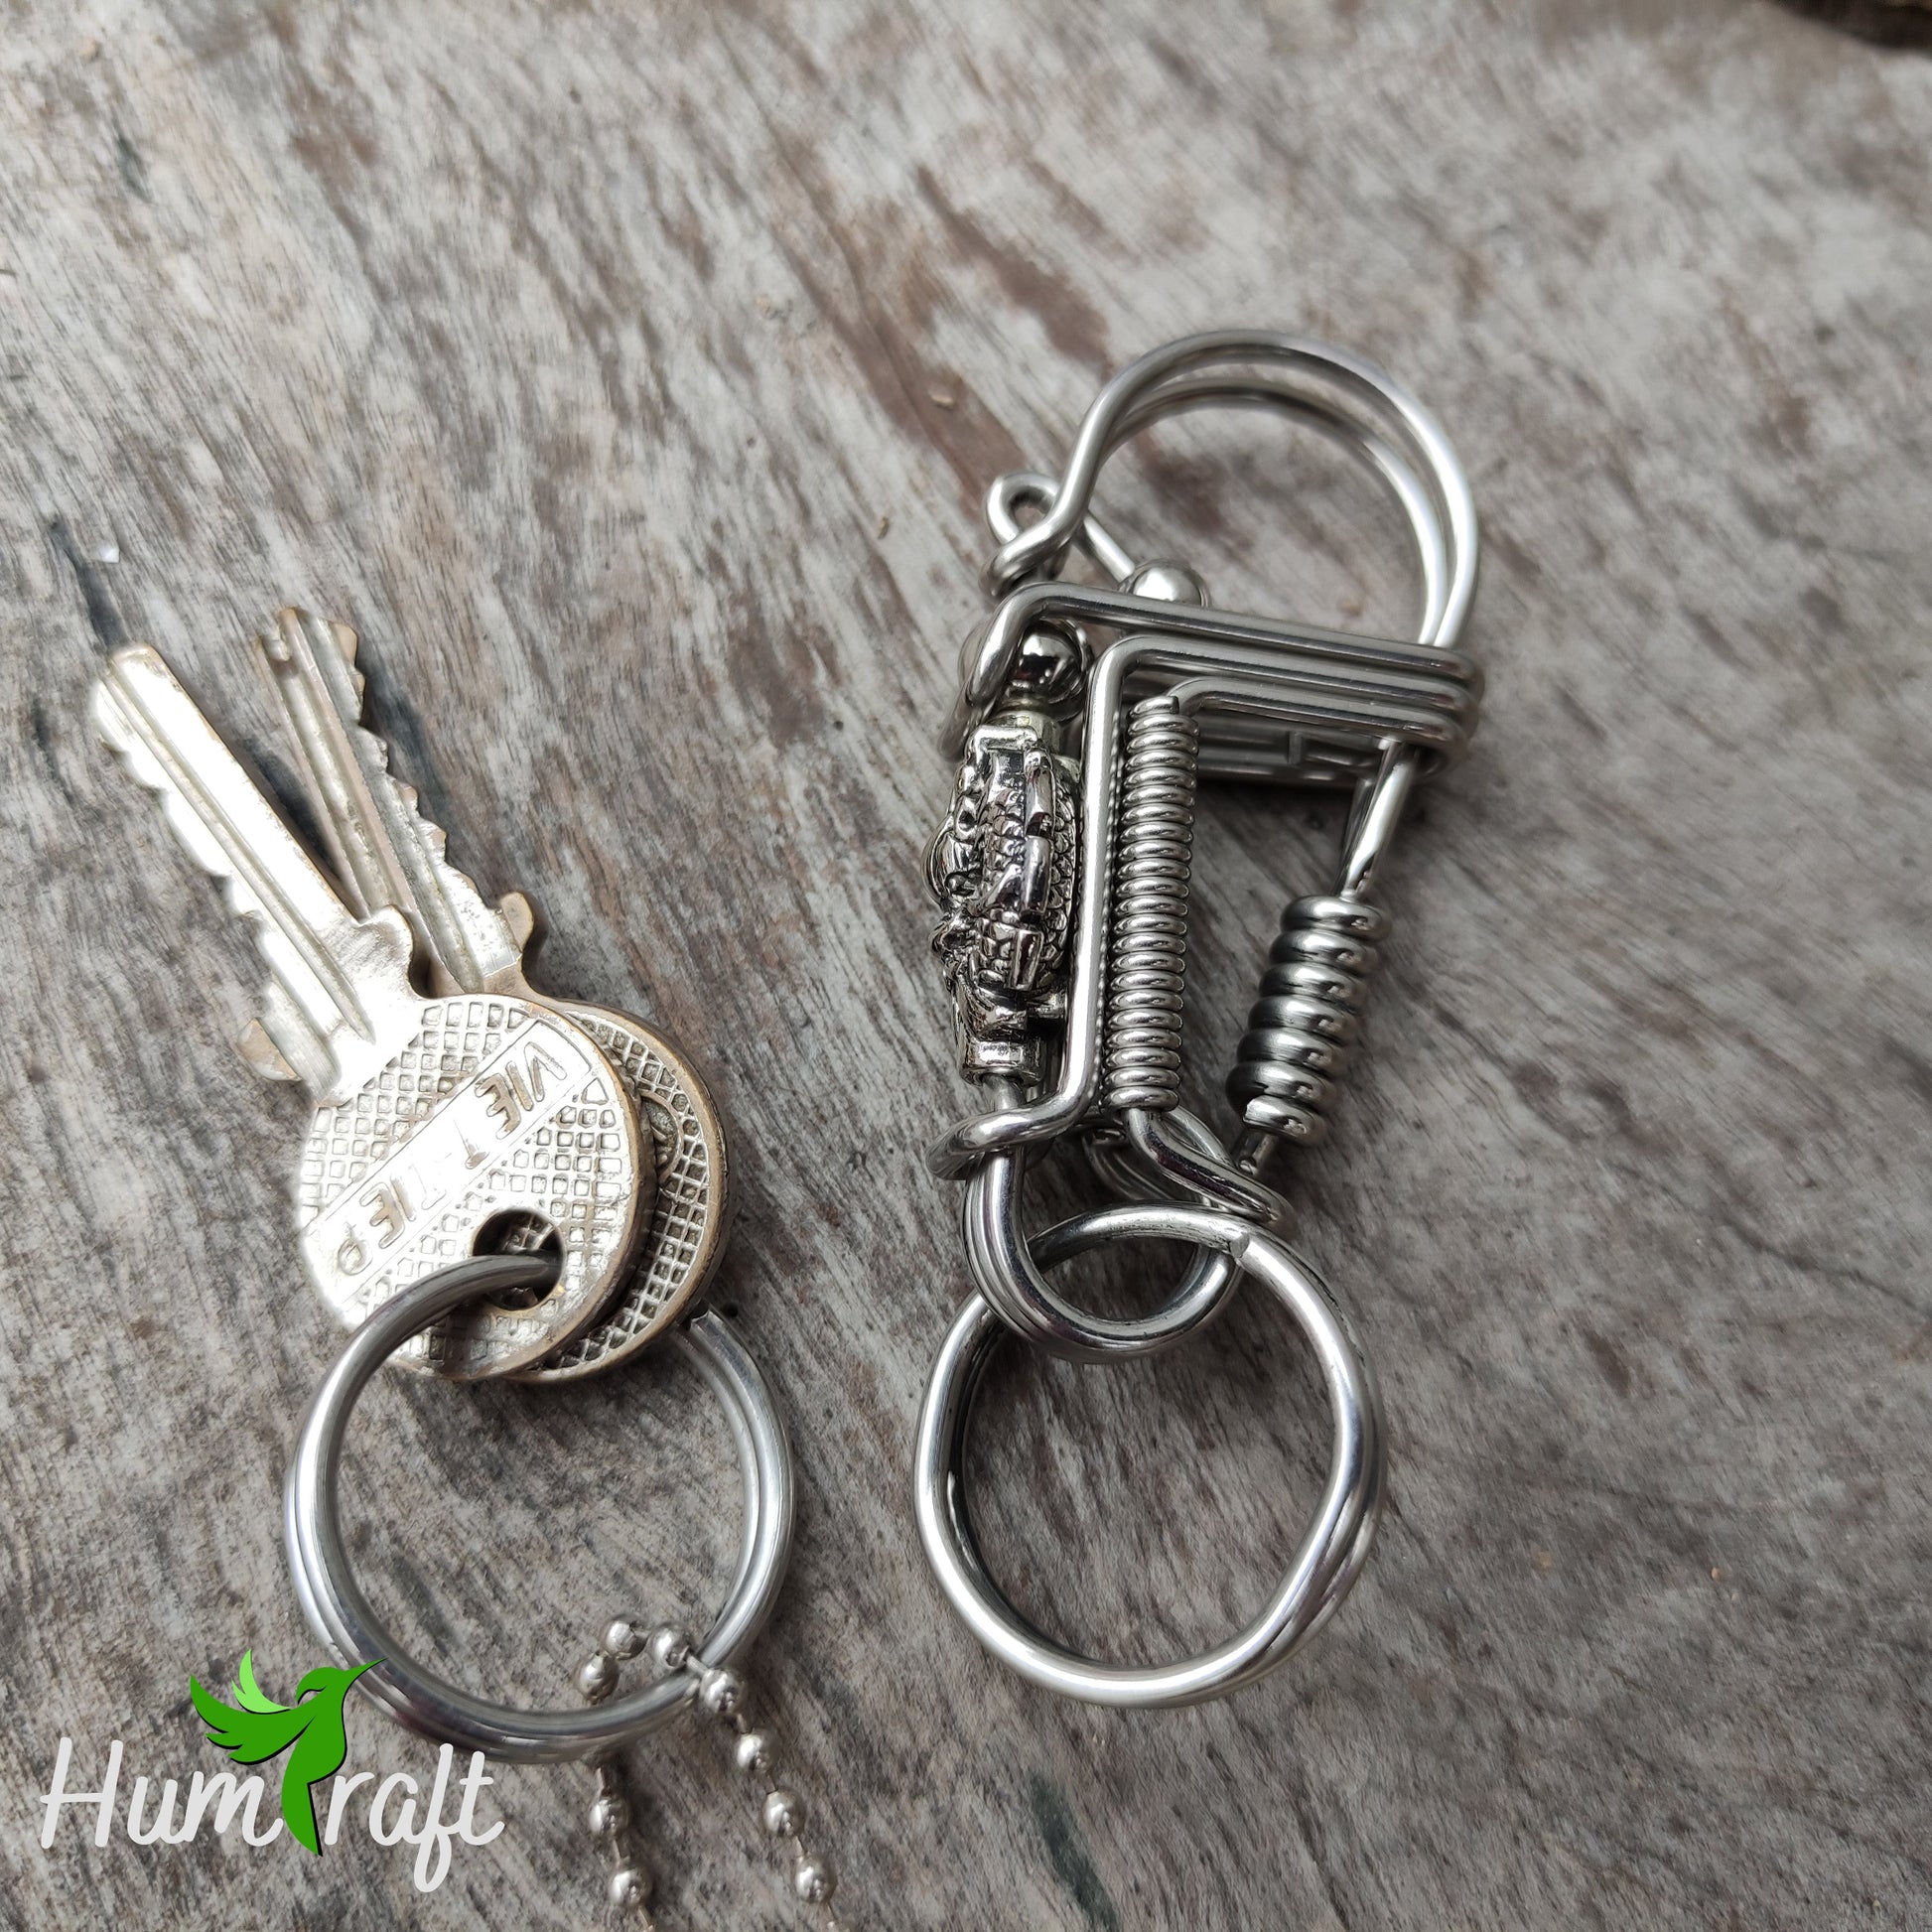 Handmade Metal Wire Carabiner Keychain With Cylinder Pattern, Super Durable  Keychain Buy Once Use Forever 